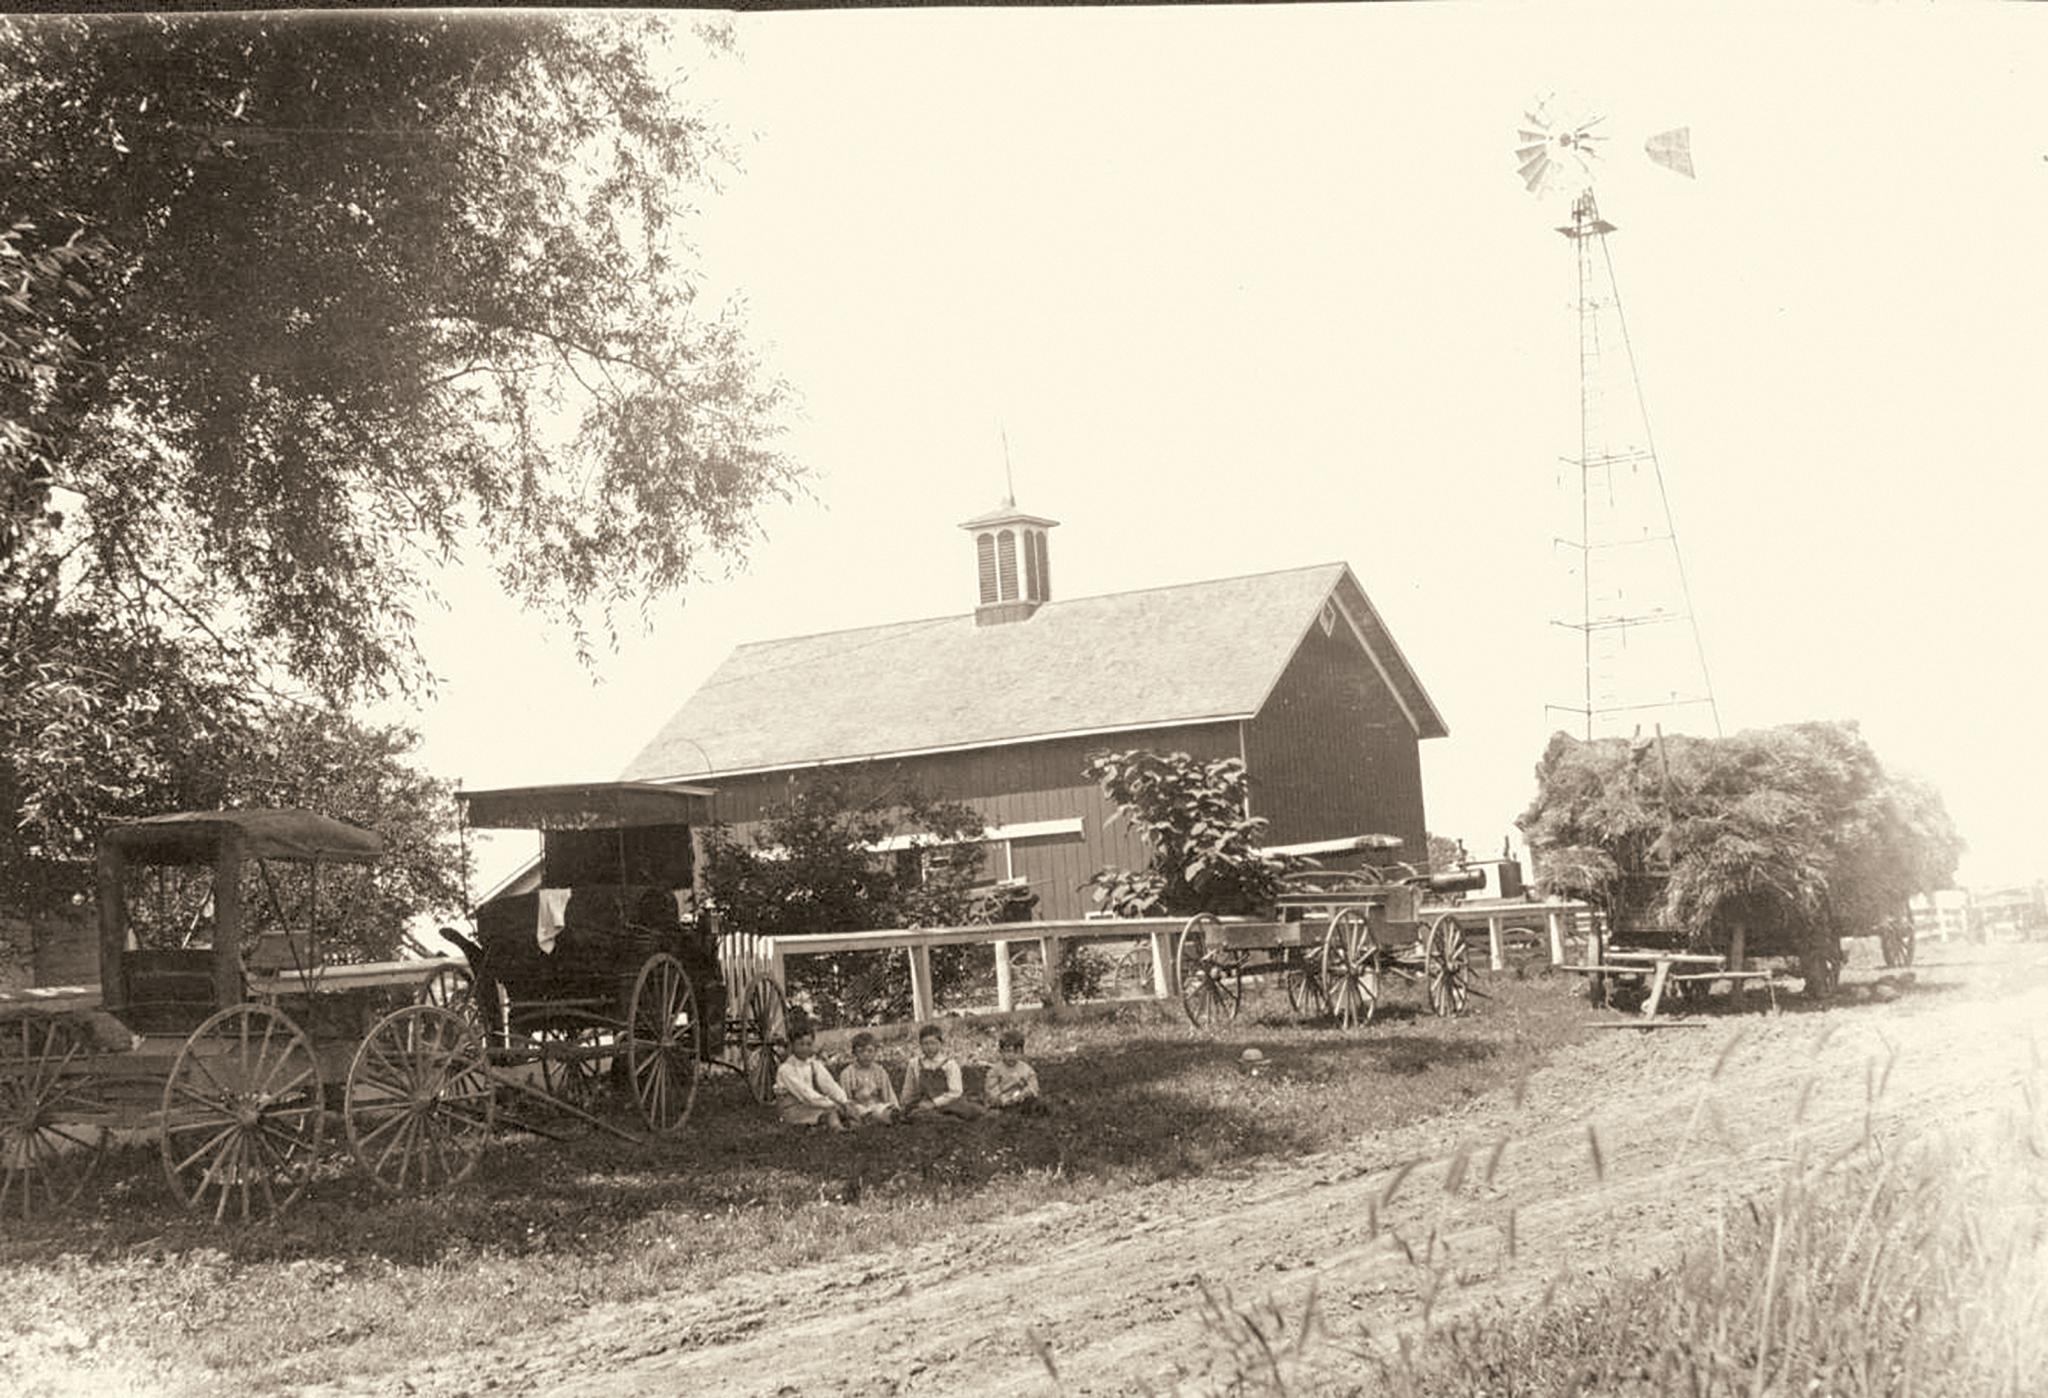 Naperville farm with windmill, late nineteenth century
